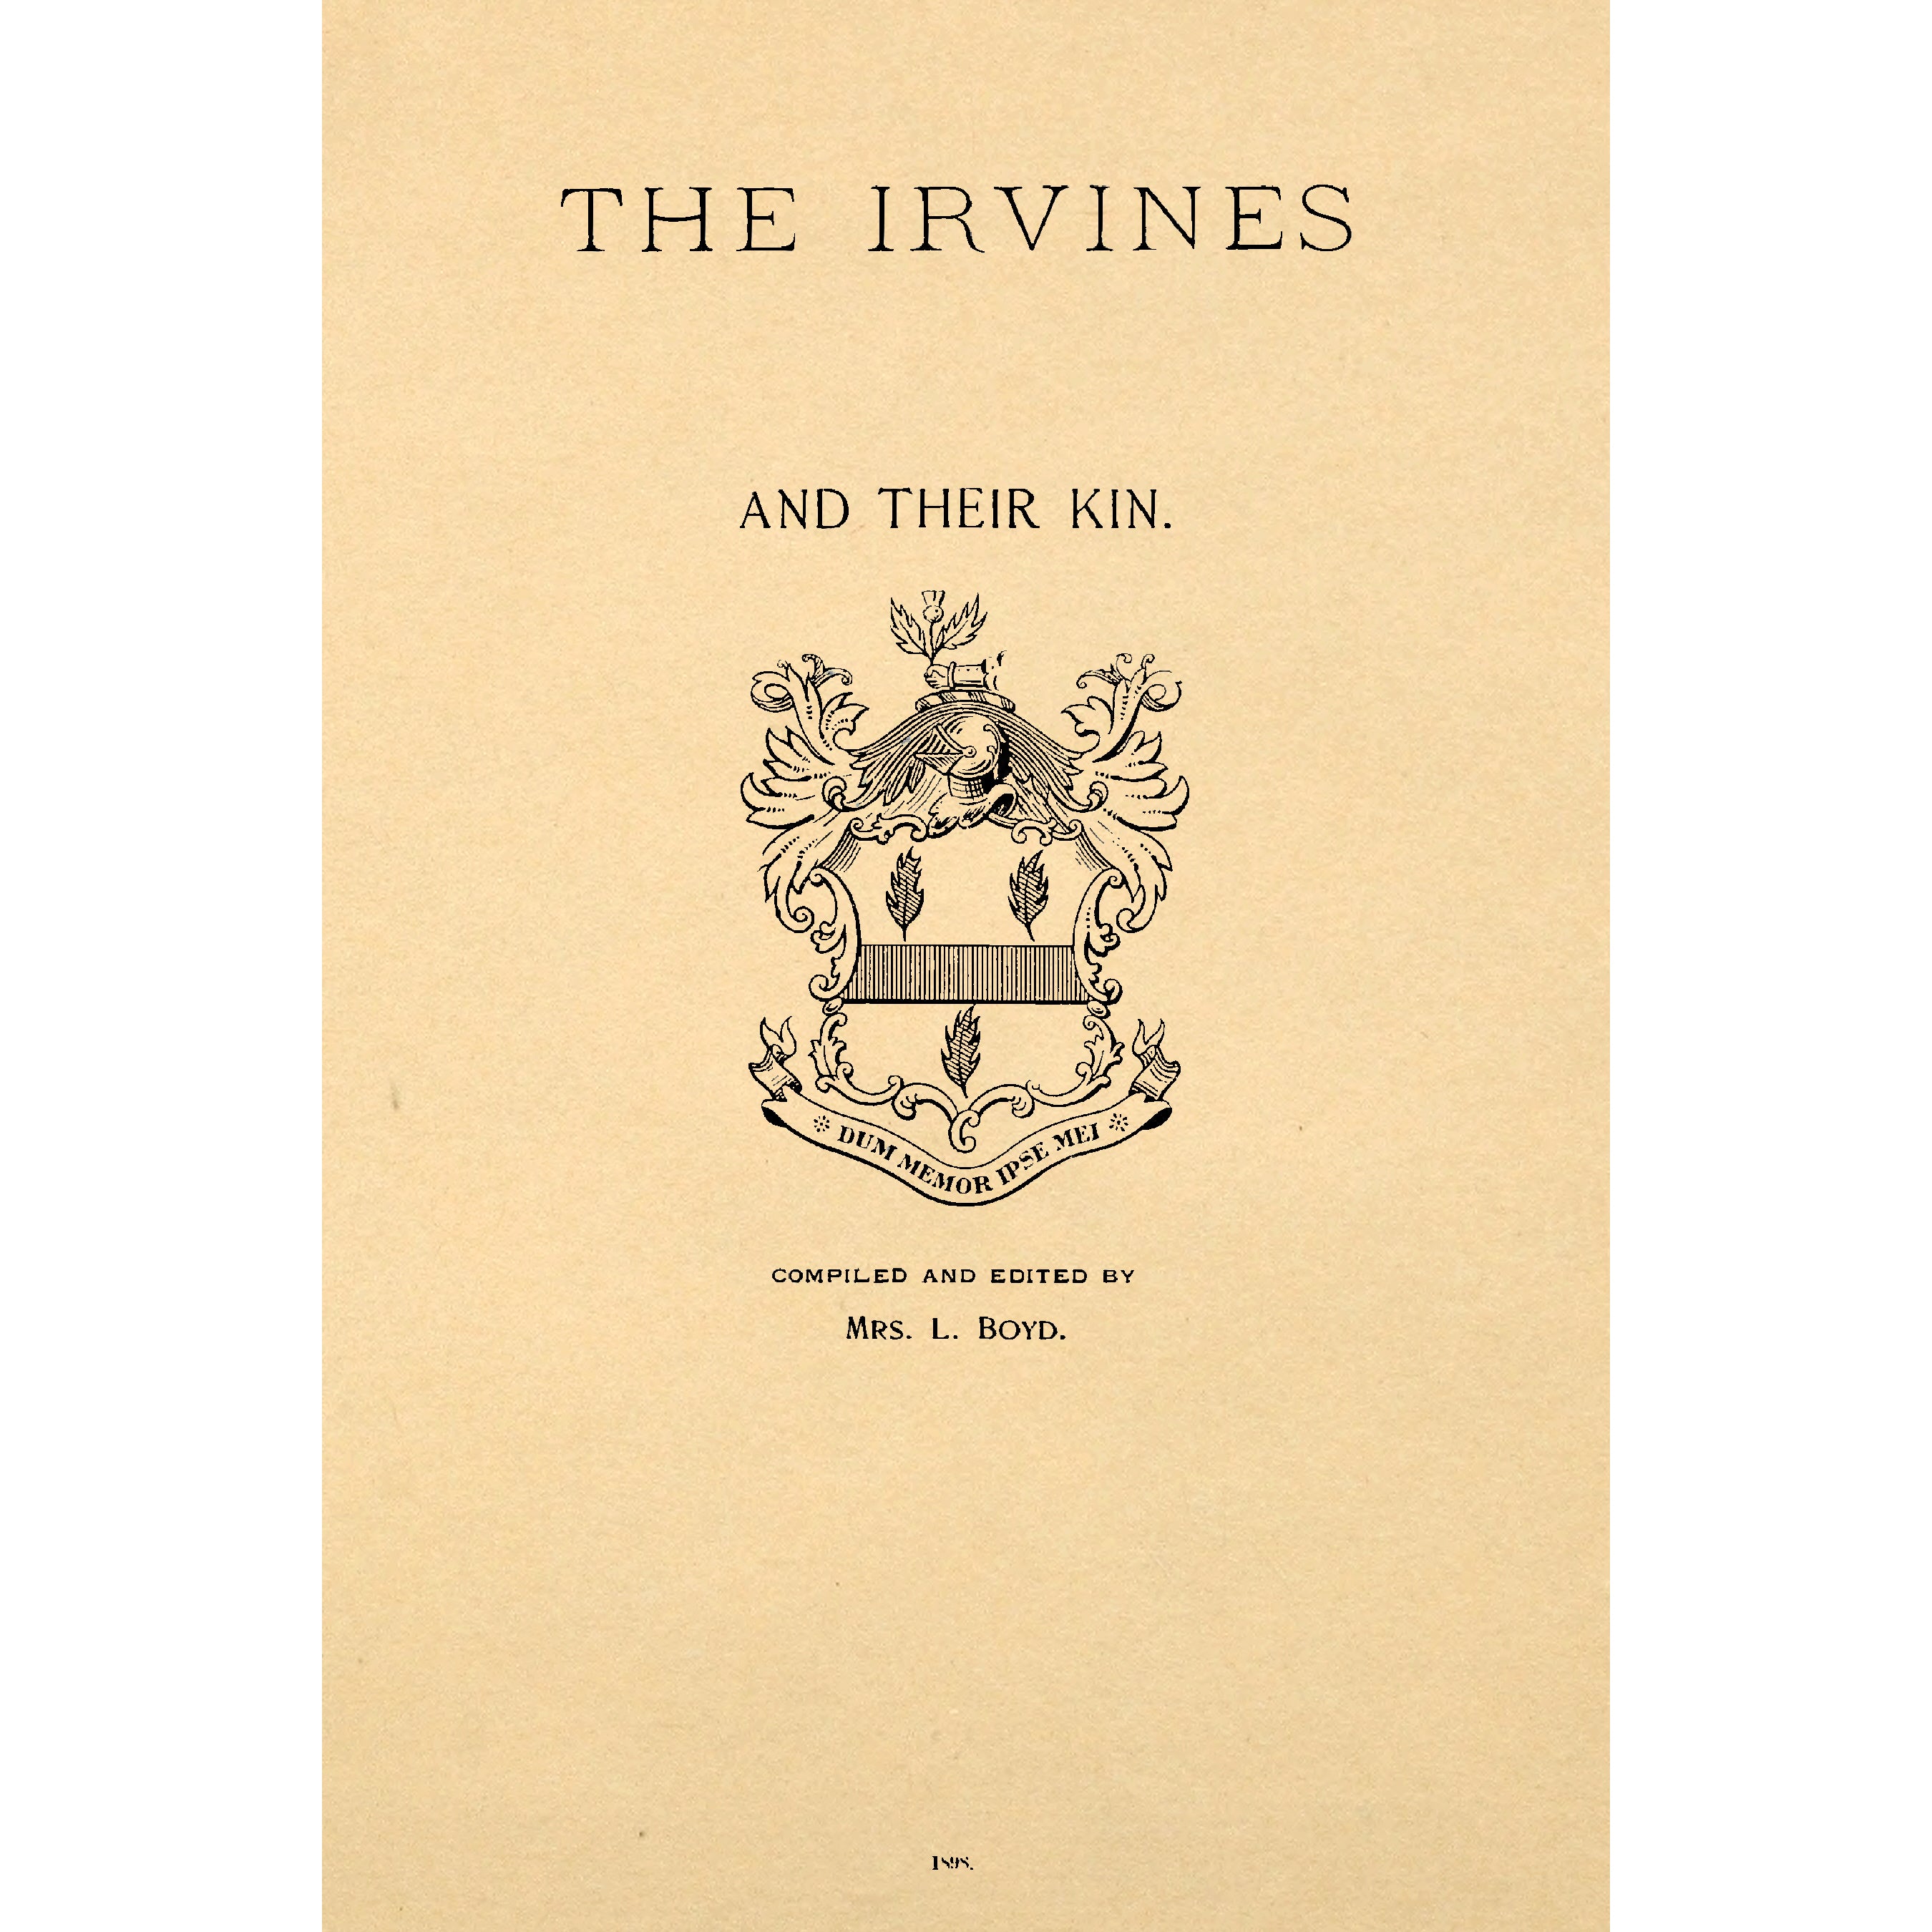 The Irvines and their Kin